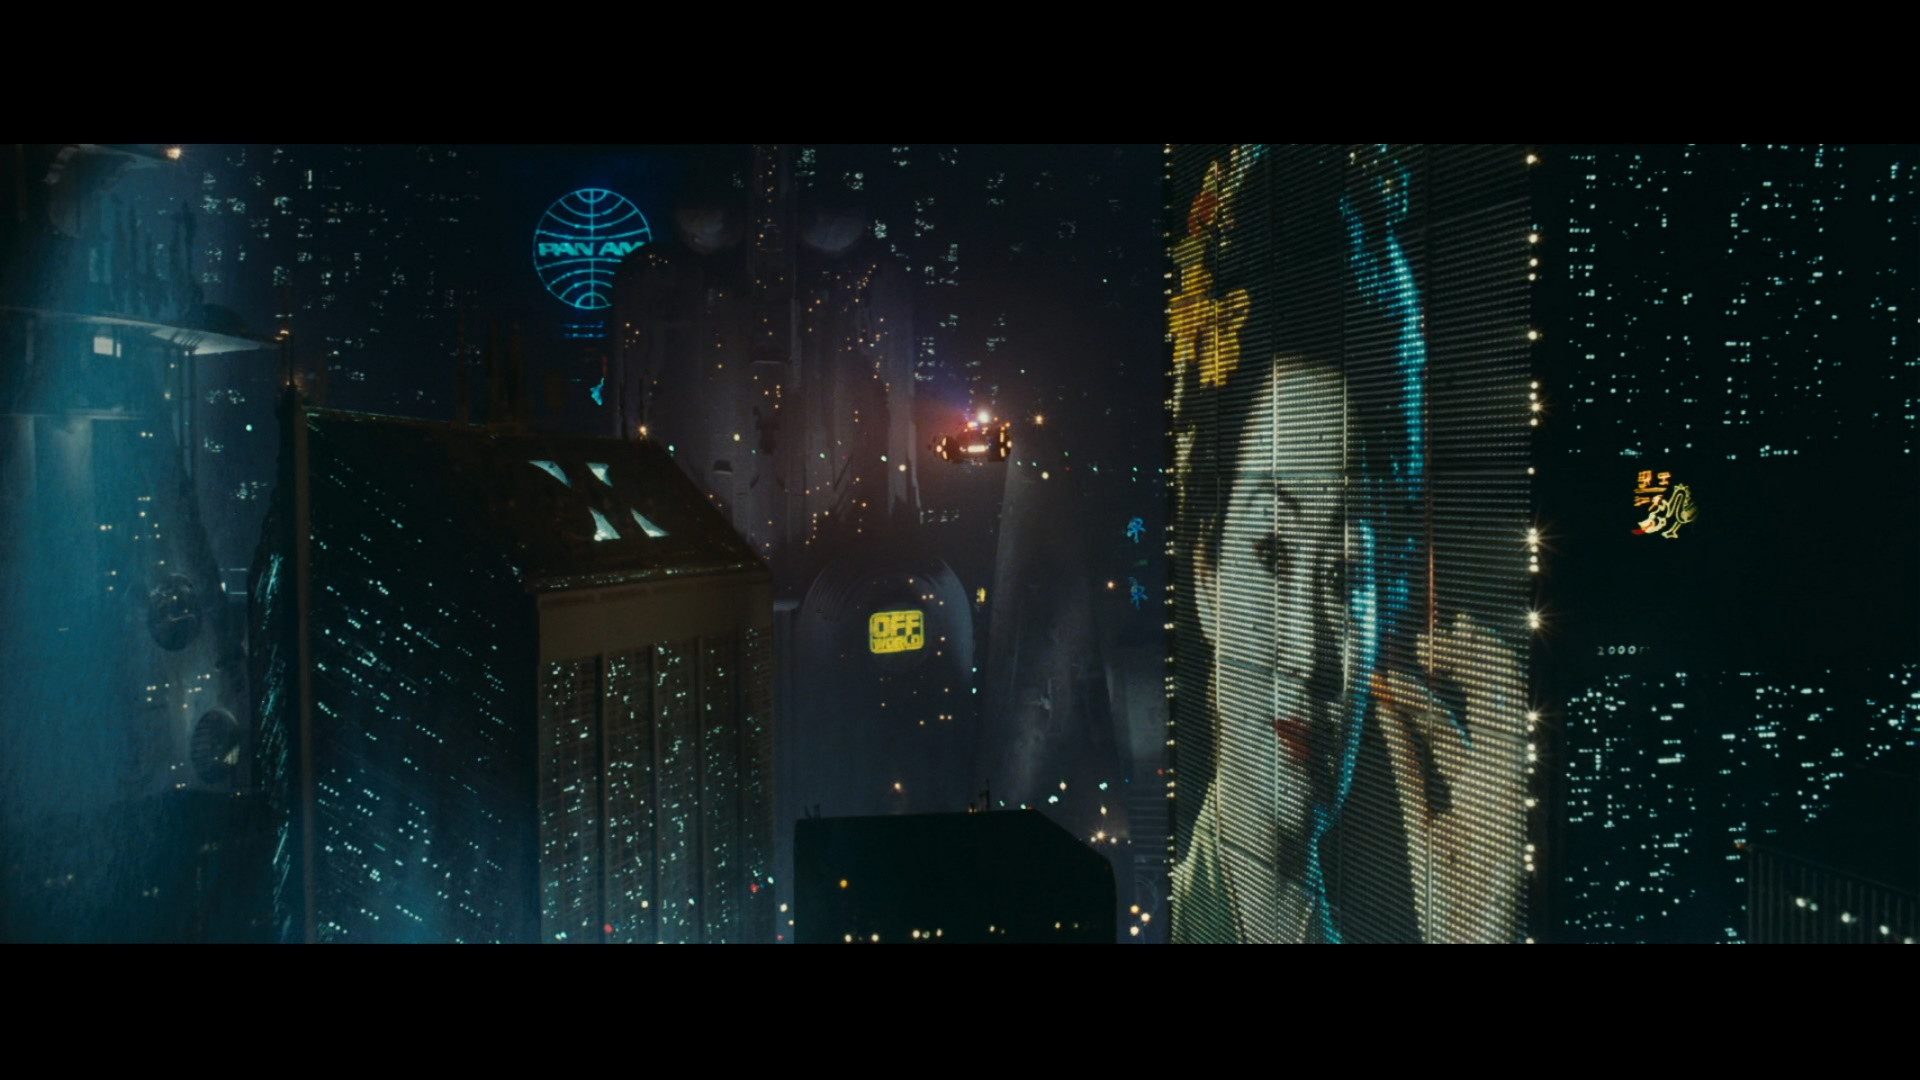 Blade Runner – Blu ray and HD DVD – Harrison Ford